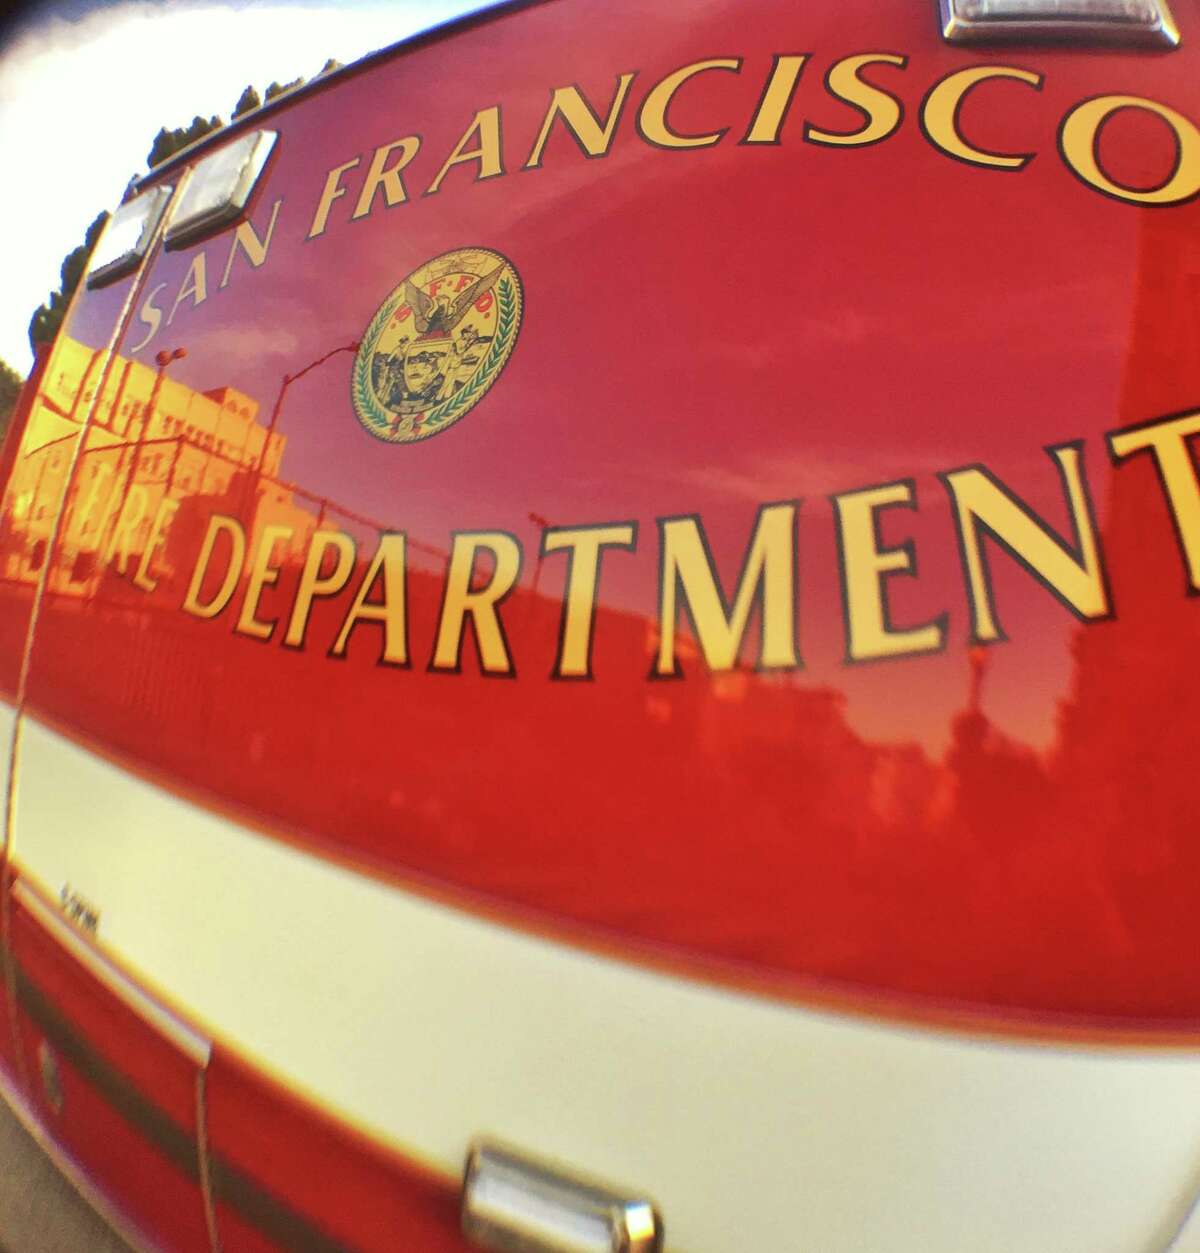 This file photograph shows a San Francisco Fire Department vehicle.